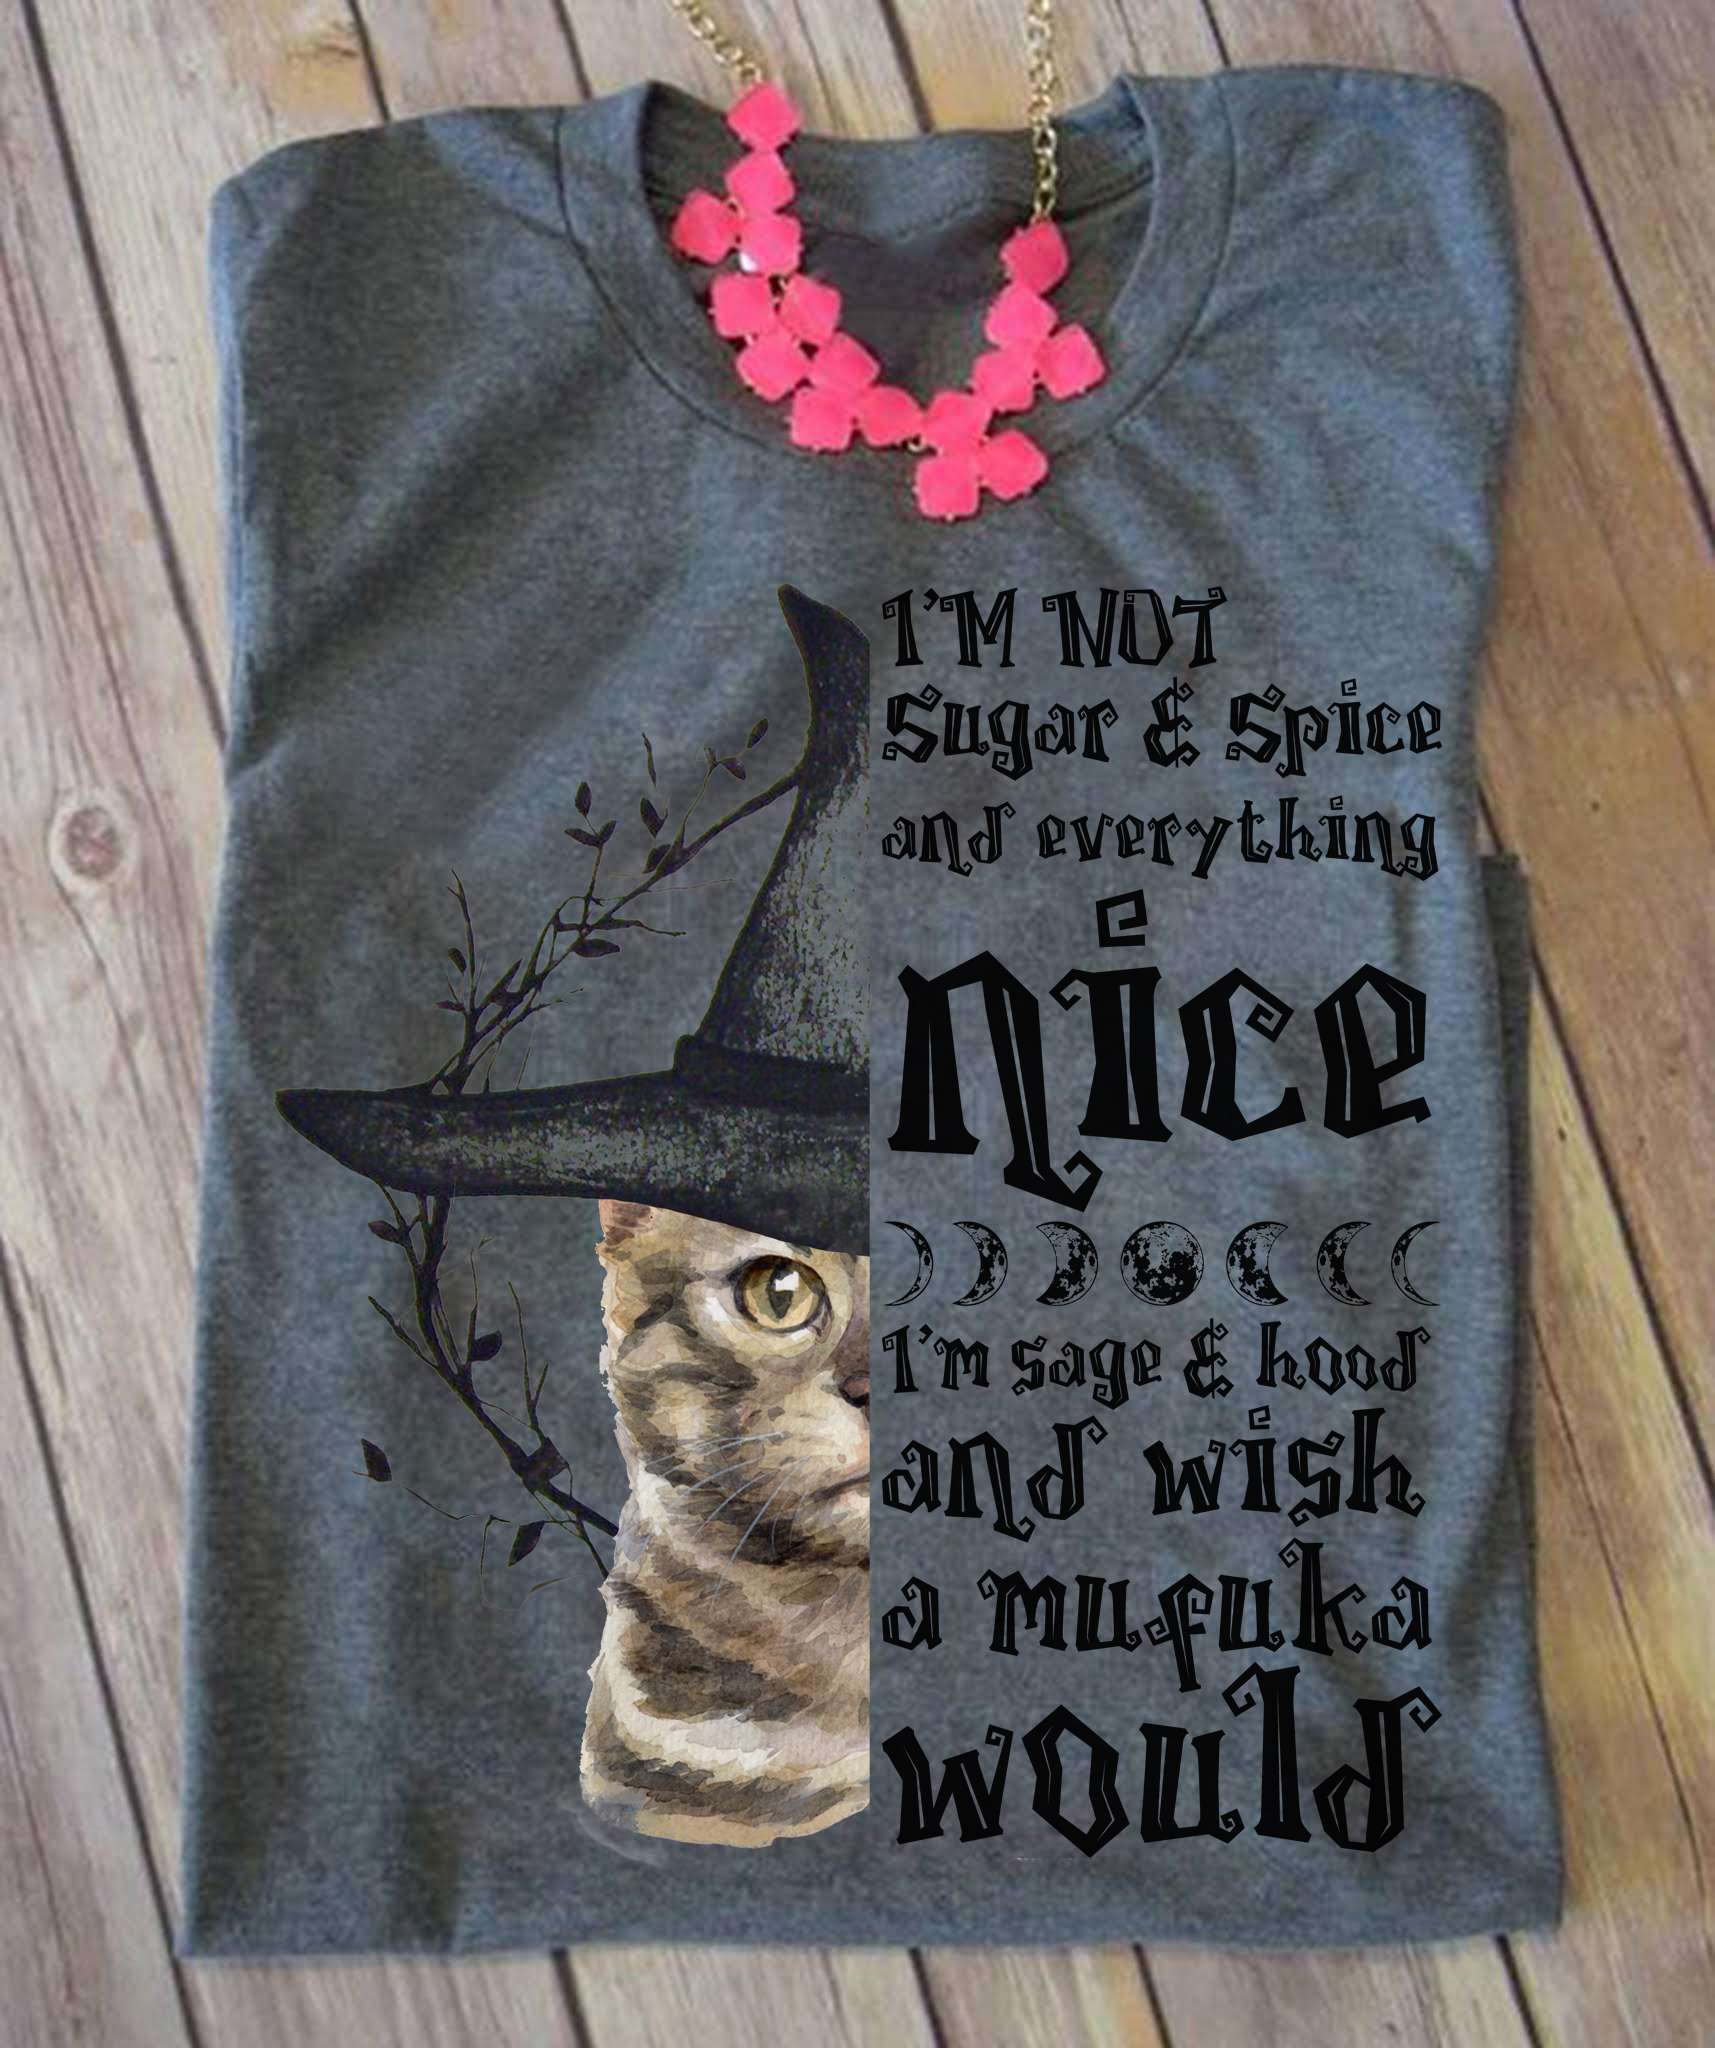 I'm not sugar and spice and everything nice - Sage and hood and wish a mufuka would, witch cat